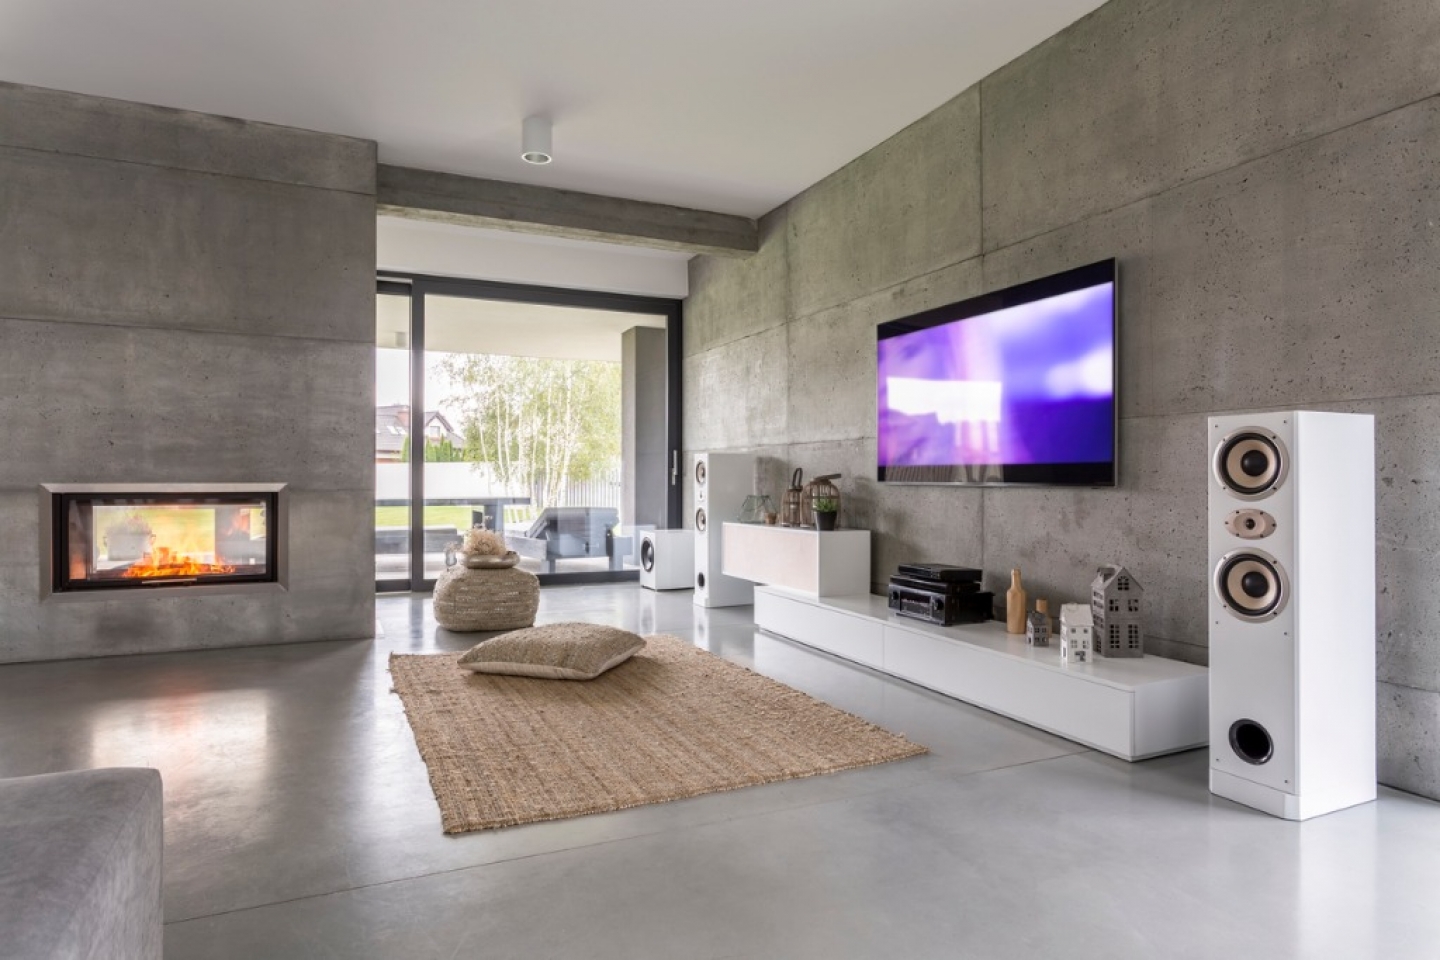 tv-living-room-with-window-picture-id637